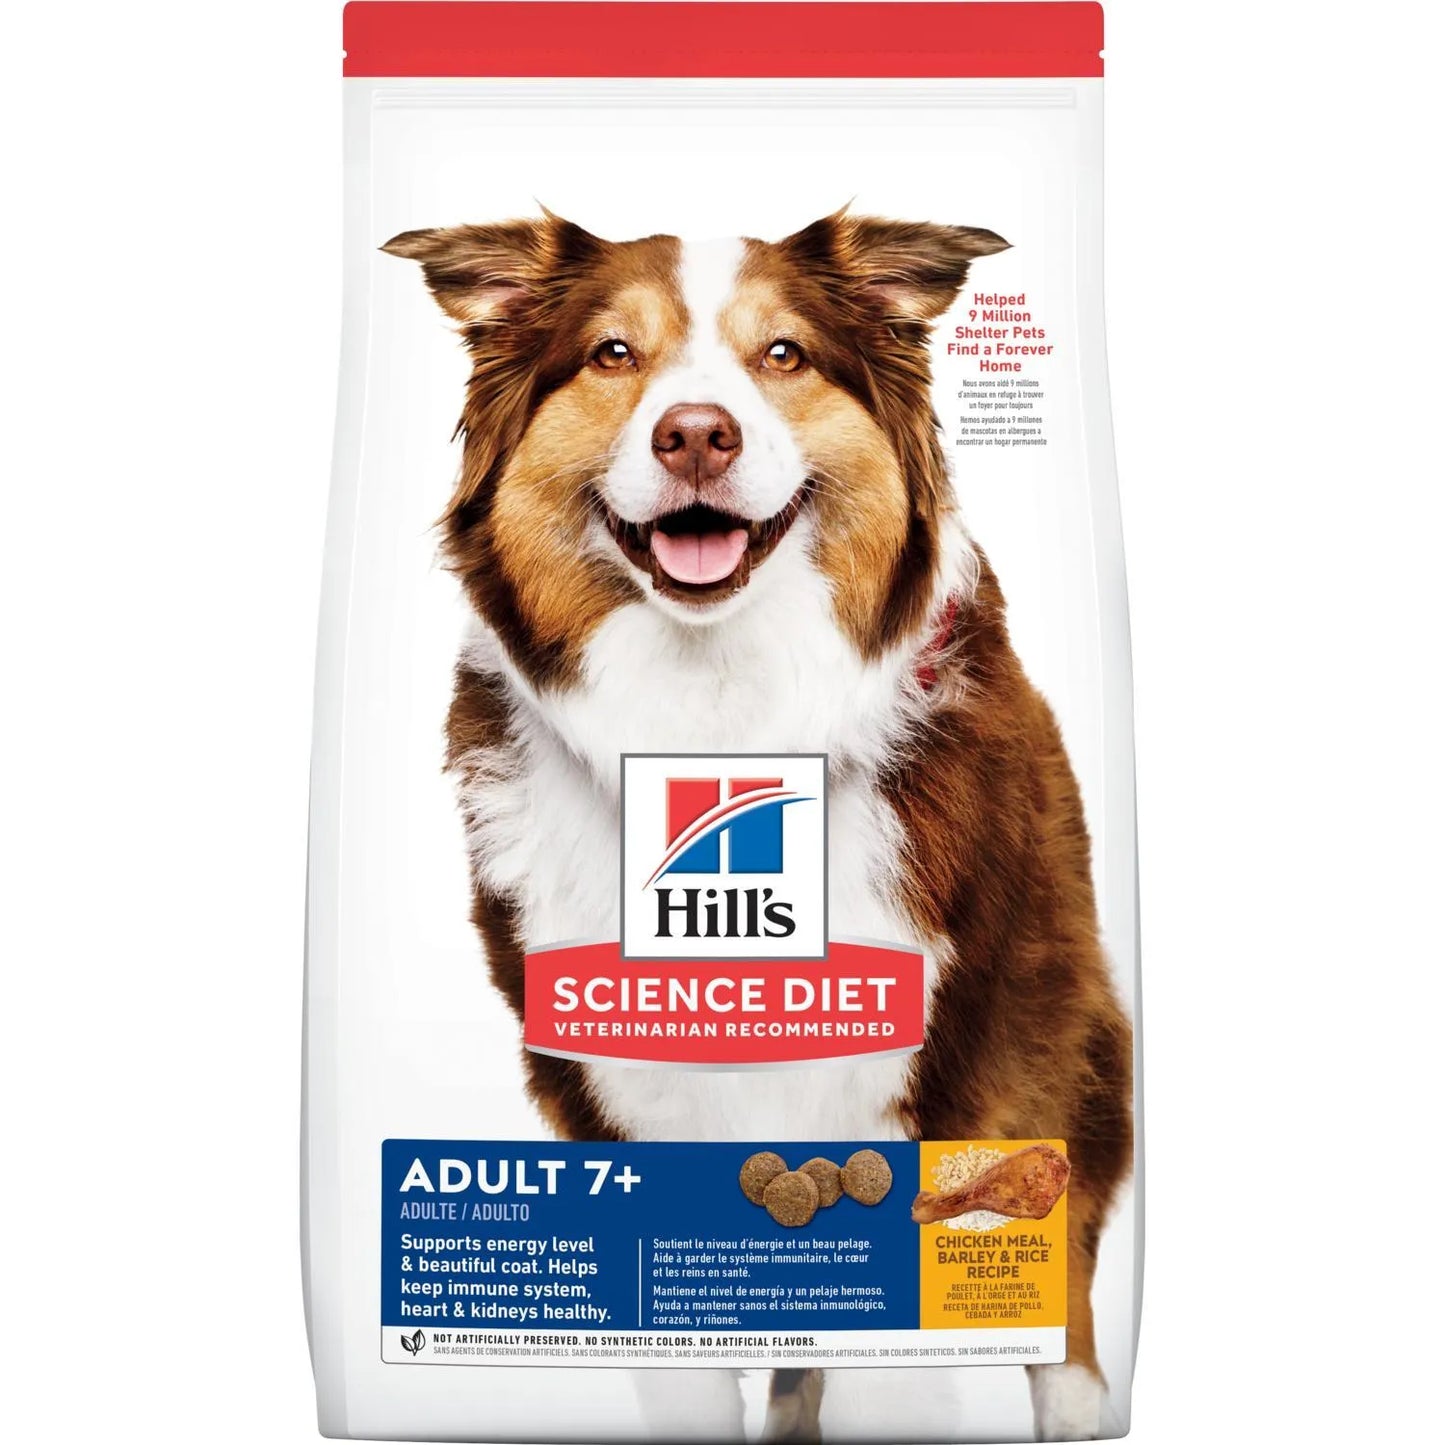 Hill's® Science Diet® Adult 7+ Chicken Meal, Barley & Rice Recipe Dry Dog Food